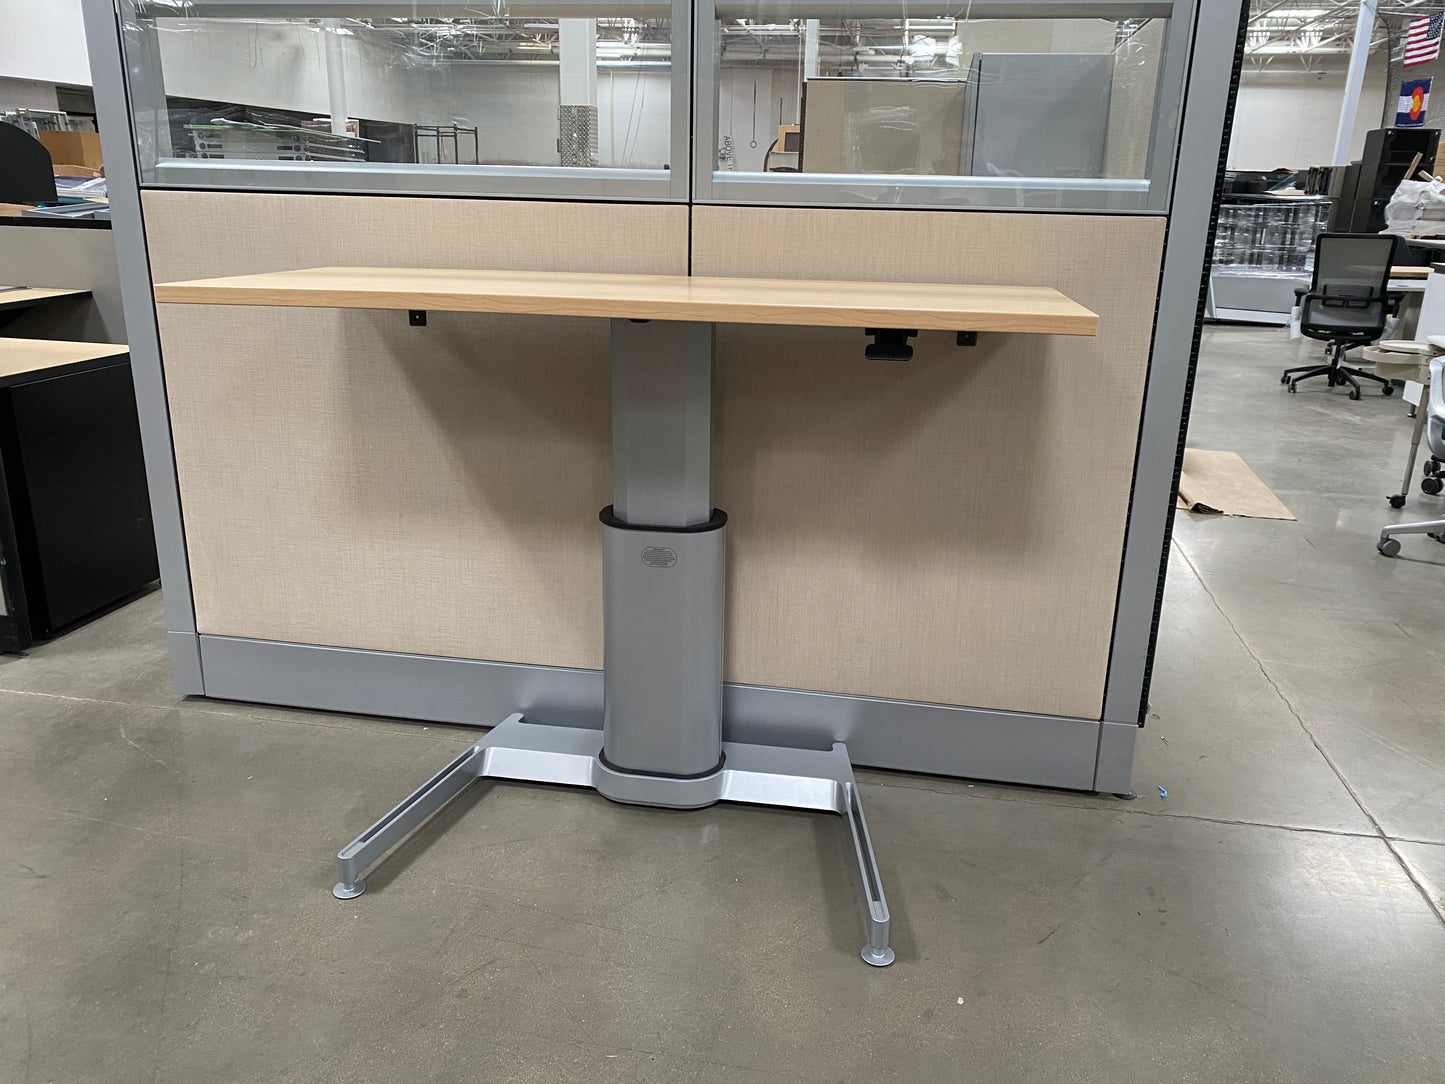 Load image into Gallery viewer, Steelcase Airtouch adjustable height desk fully raised
